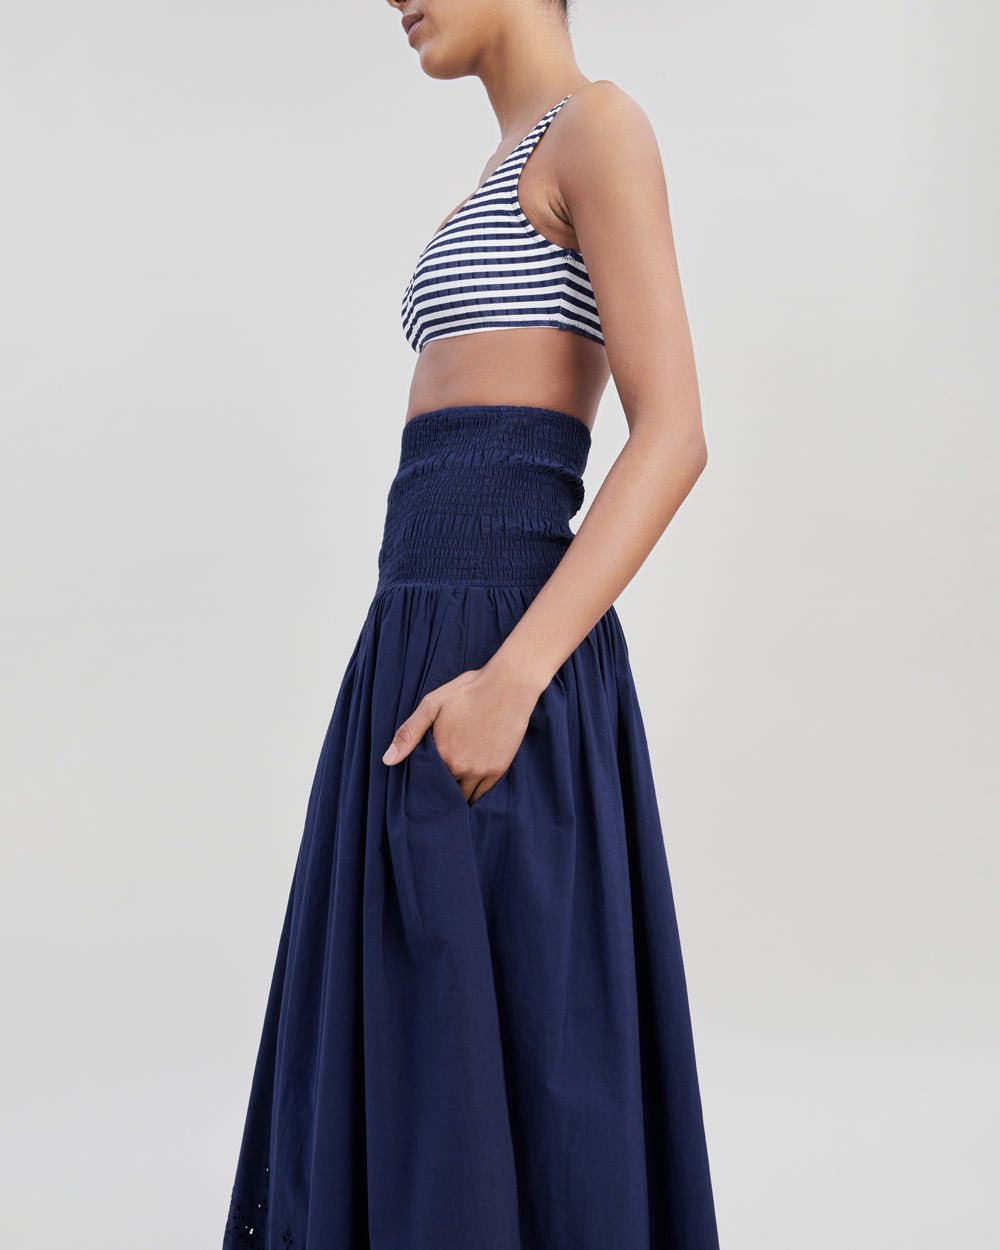 The Eyelet Zaria Skirt - Solid & Striped